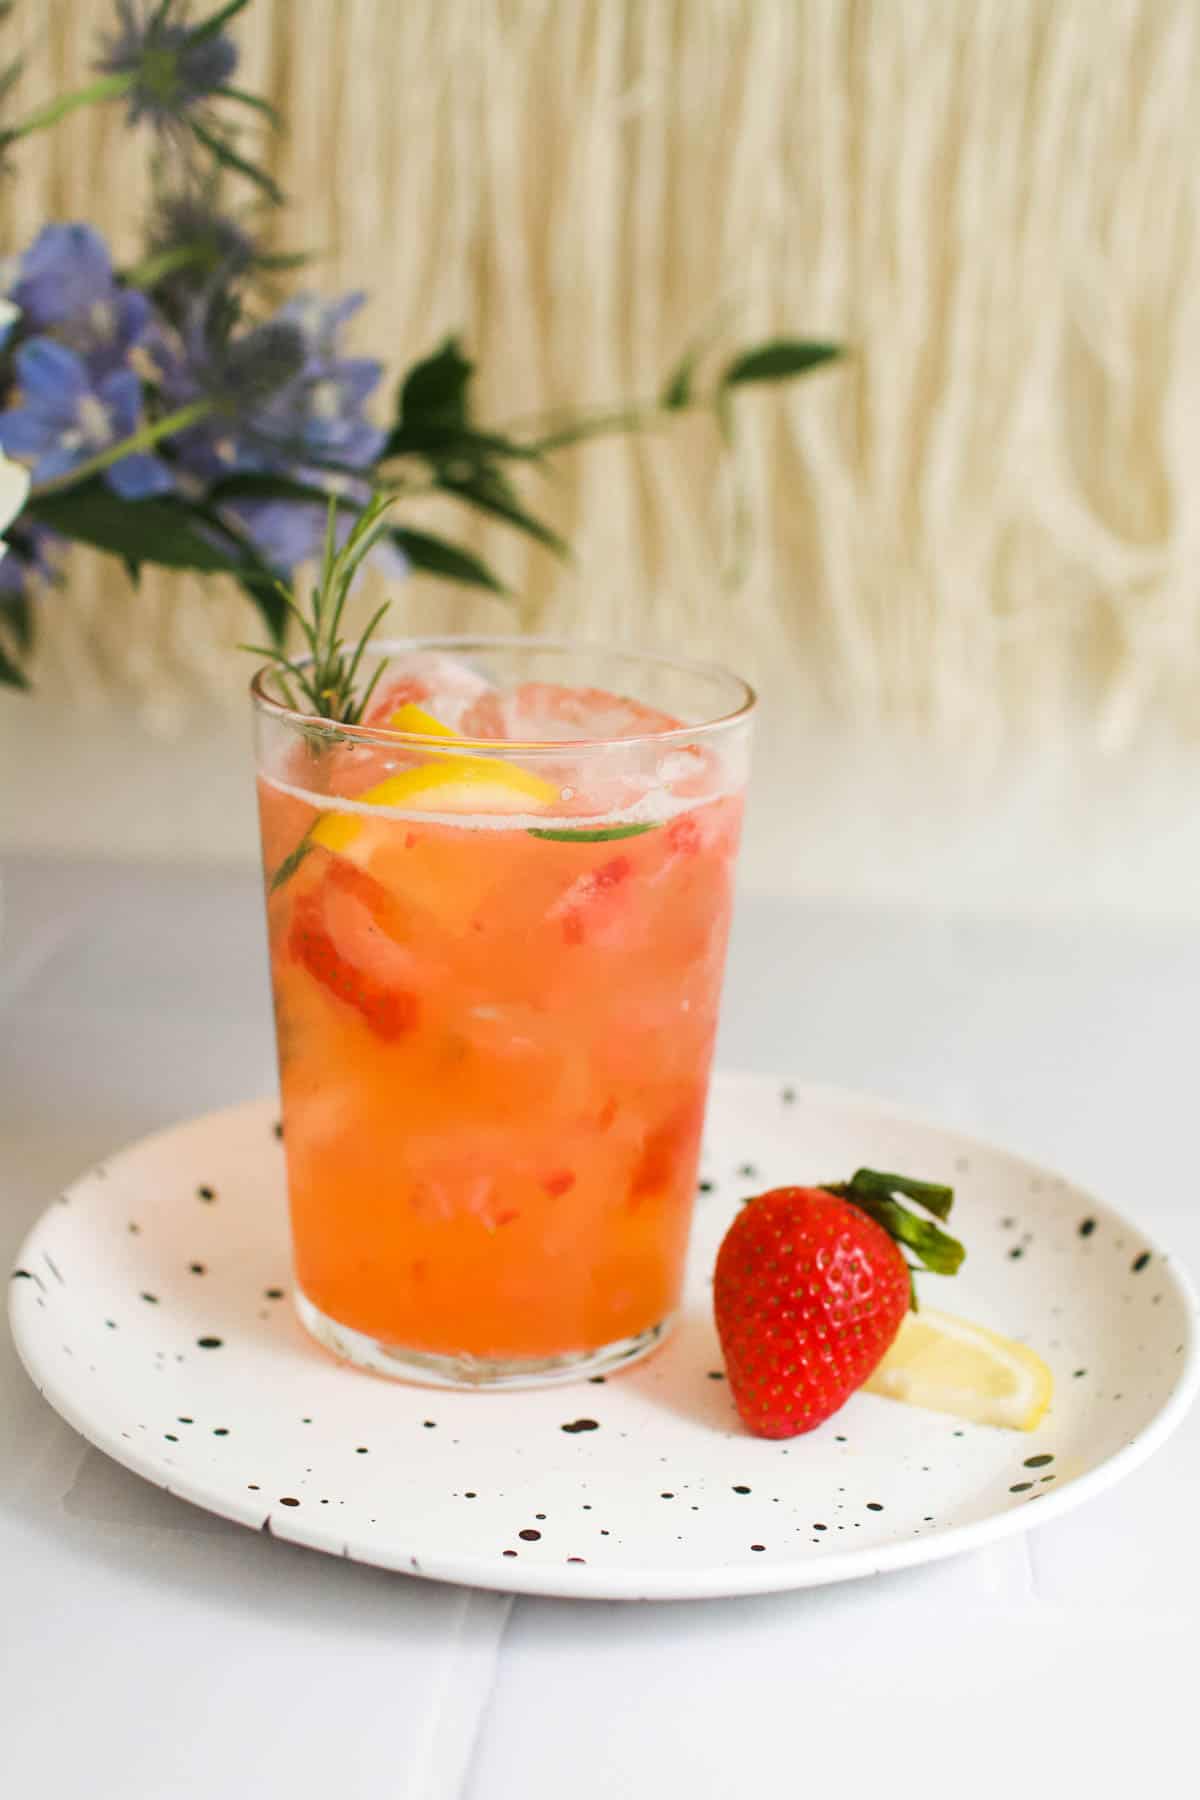 A strawberry mocktail in a glass topped with fresh rosemary and lemon slices next to fresh strawberries on a plate.